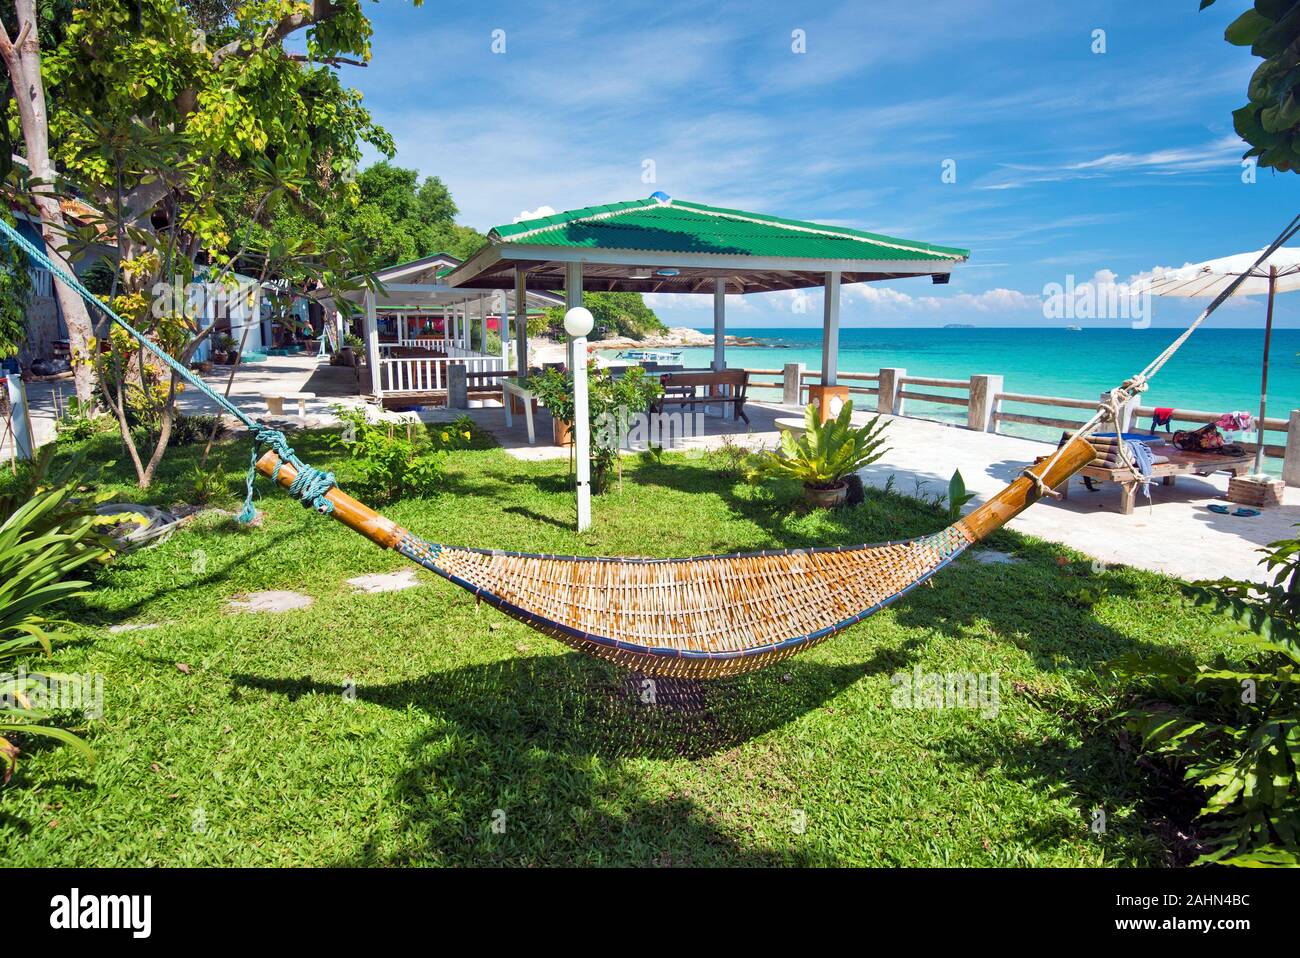 Relaxation environment in tropical beach resort, the hammock is at foreground and the sea coastline is at background. Ko Samet island, Thailand. Stock Photo